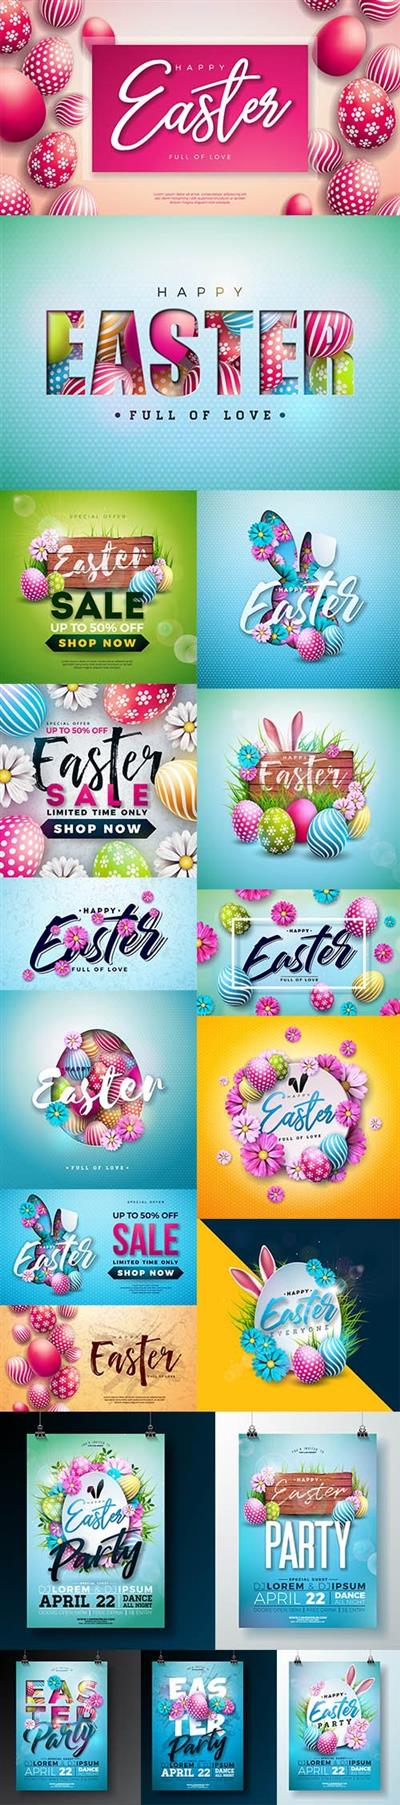 Happy Easter Holiday Premium Illustrations and Flyer Set 2